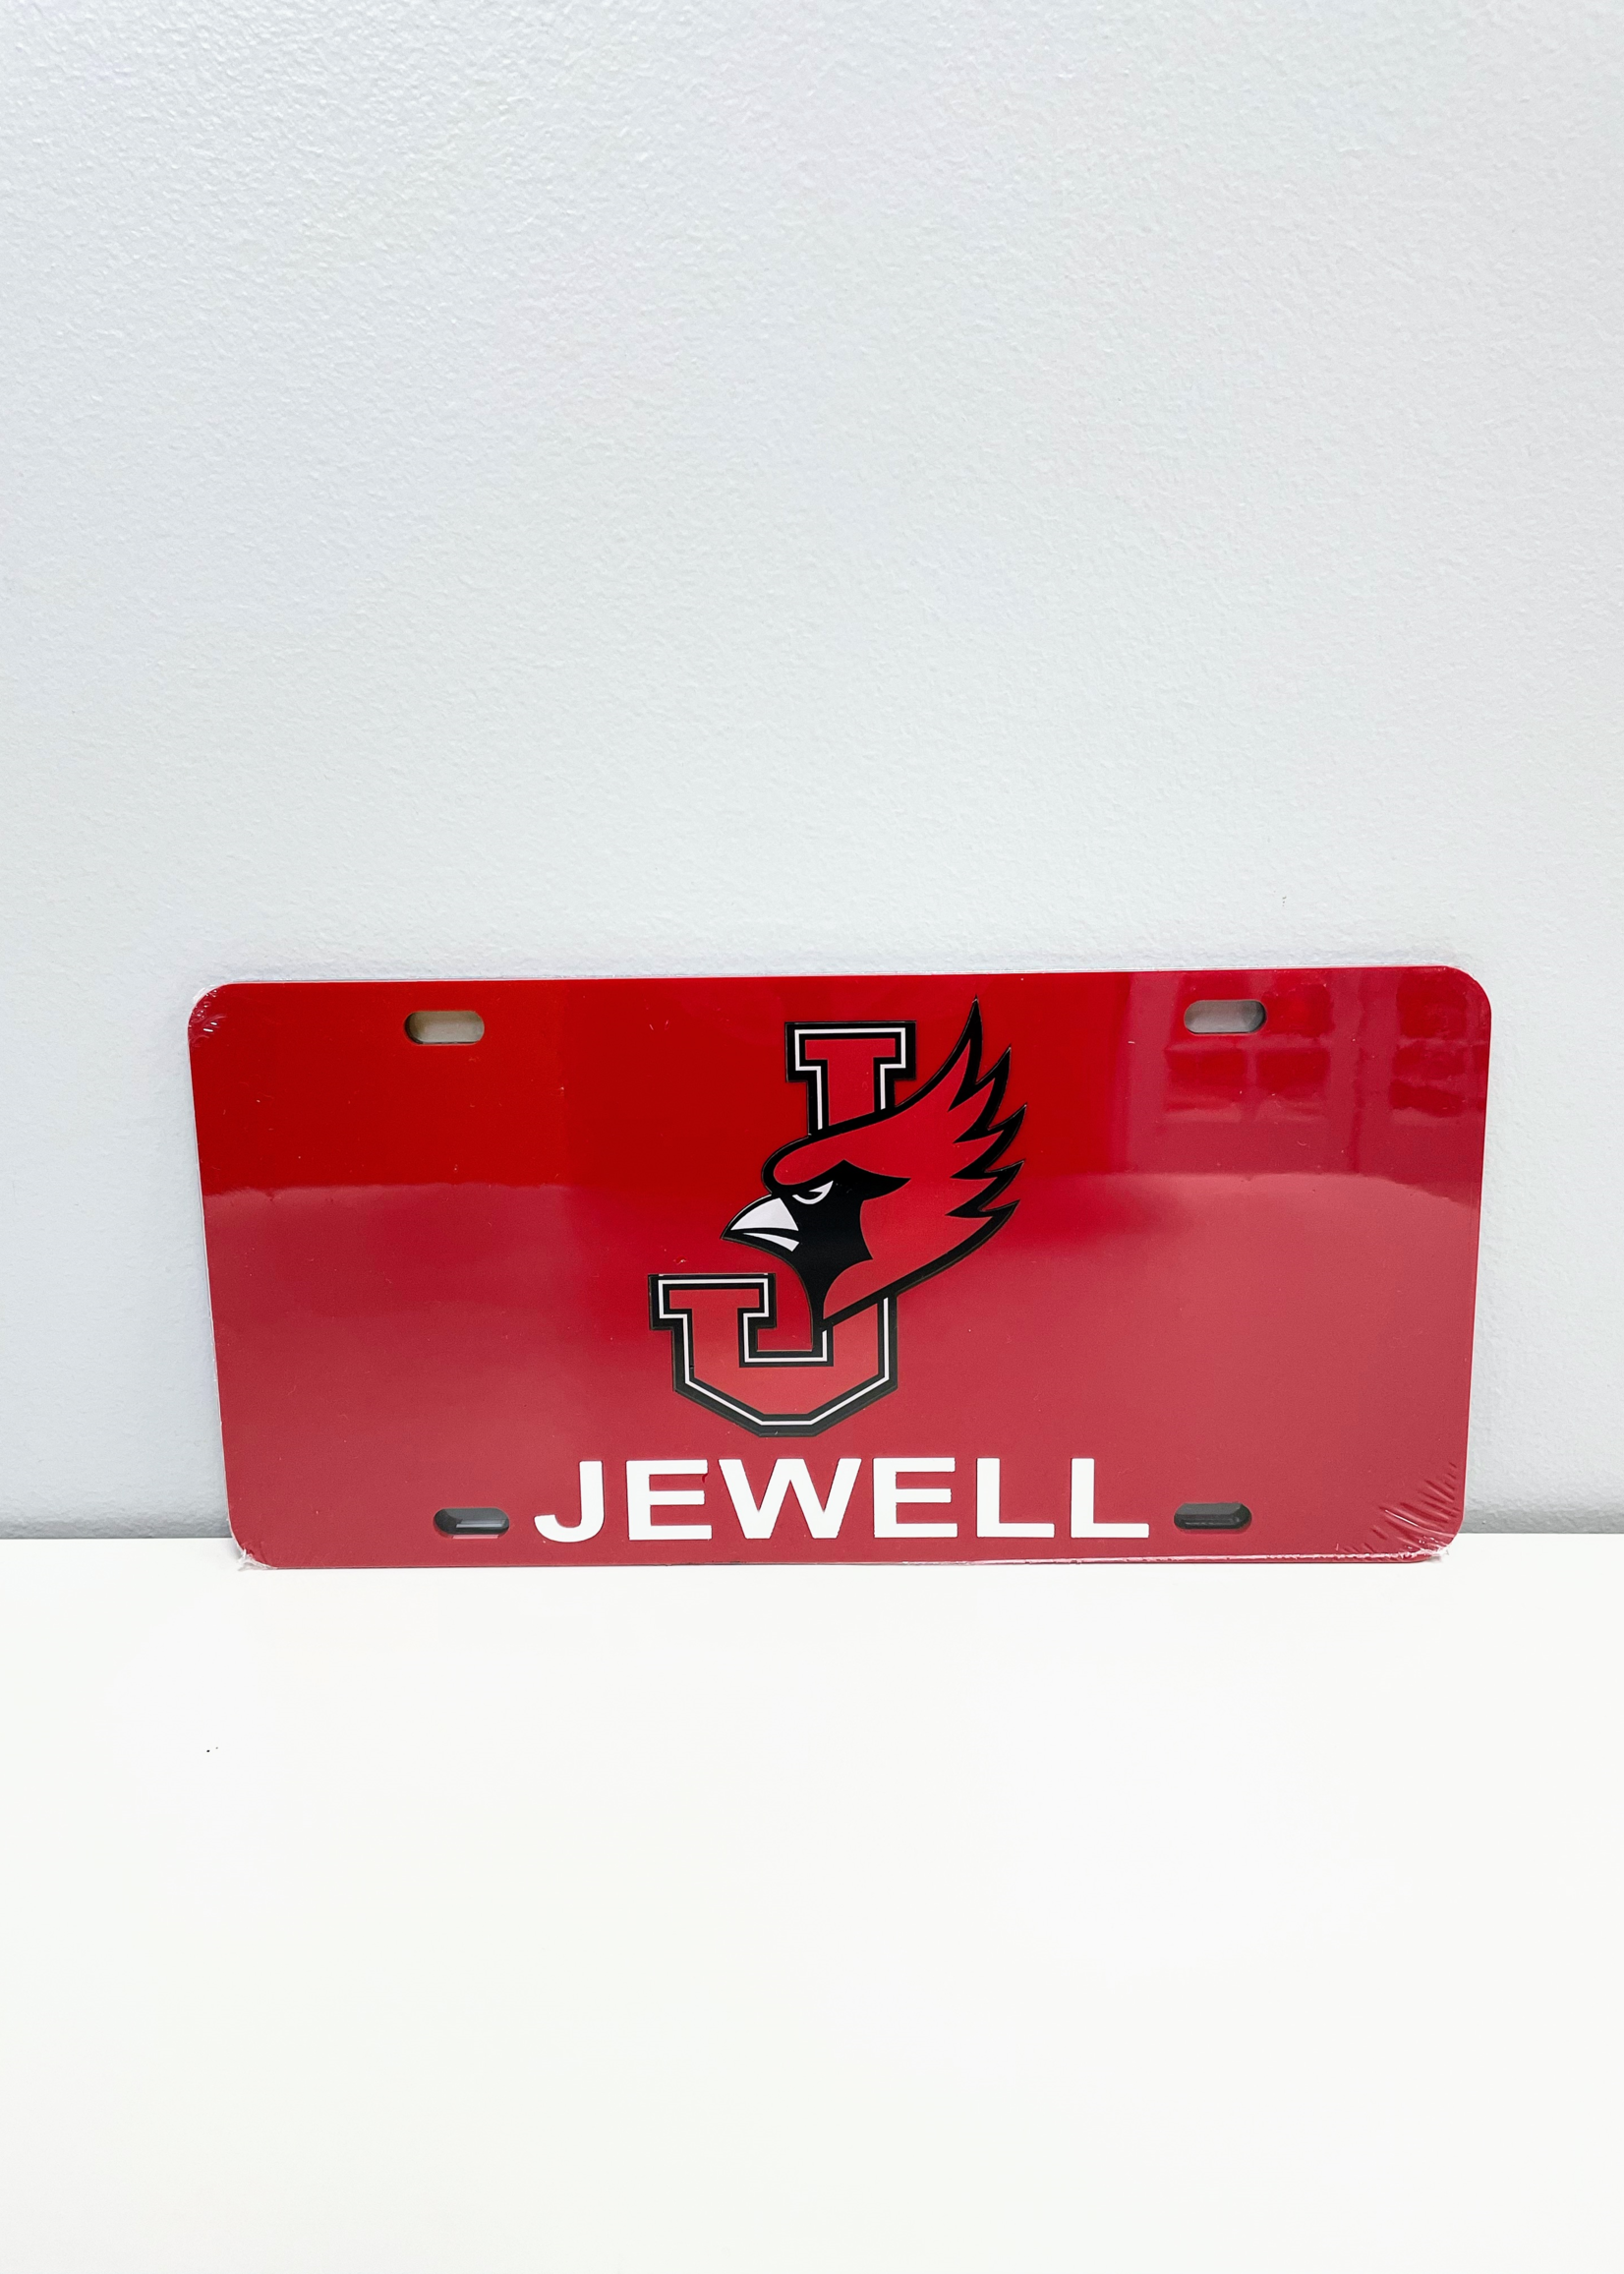 Jewell License Plate Cover / Frame